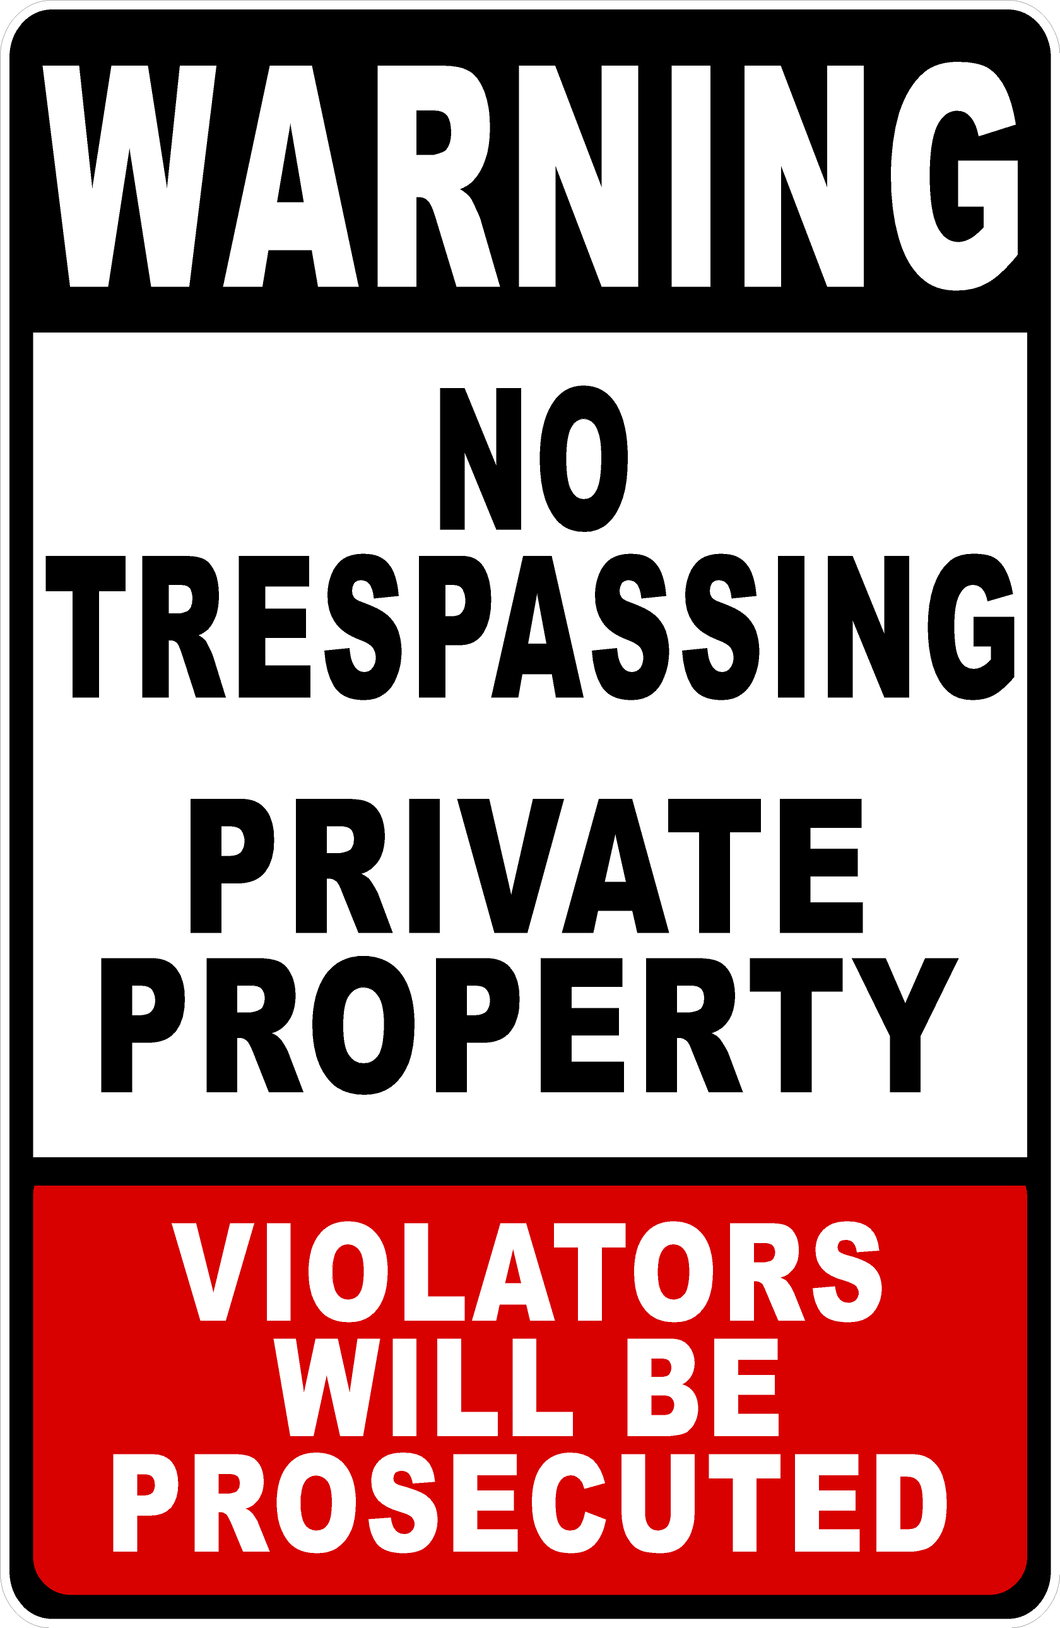 Warning No Trespassing Private Property Violators Will Be Prosecuted Sign